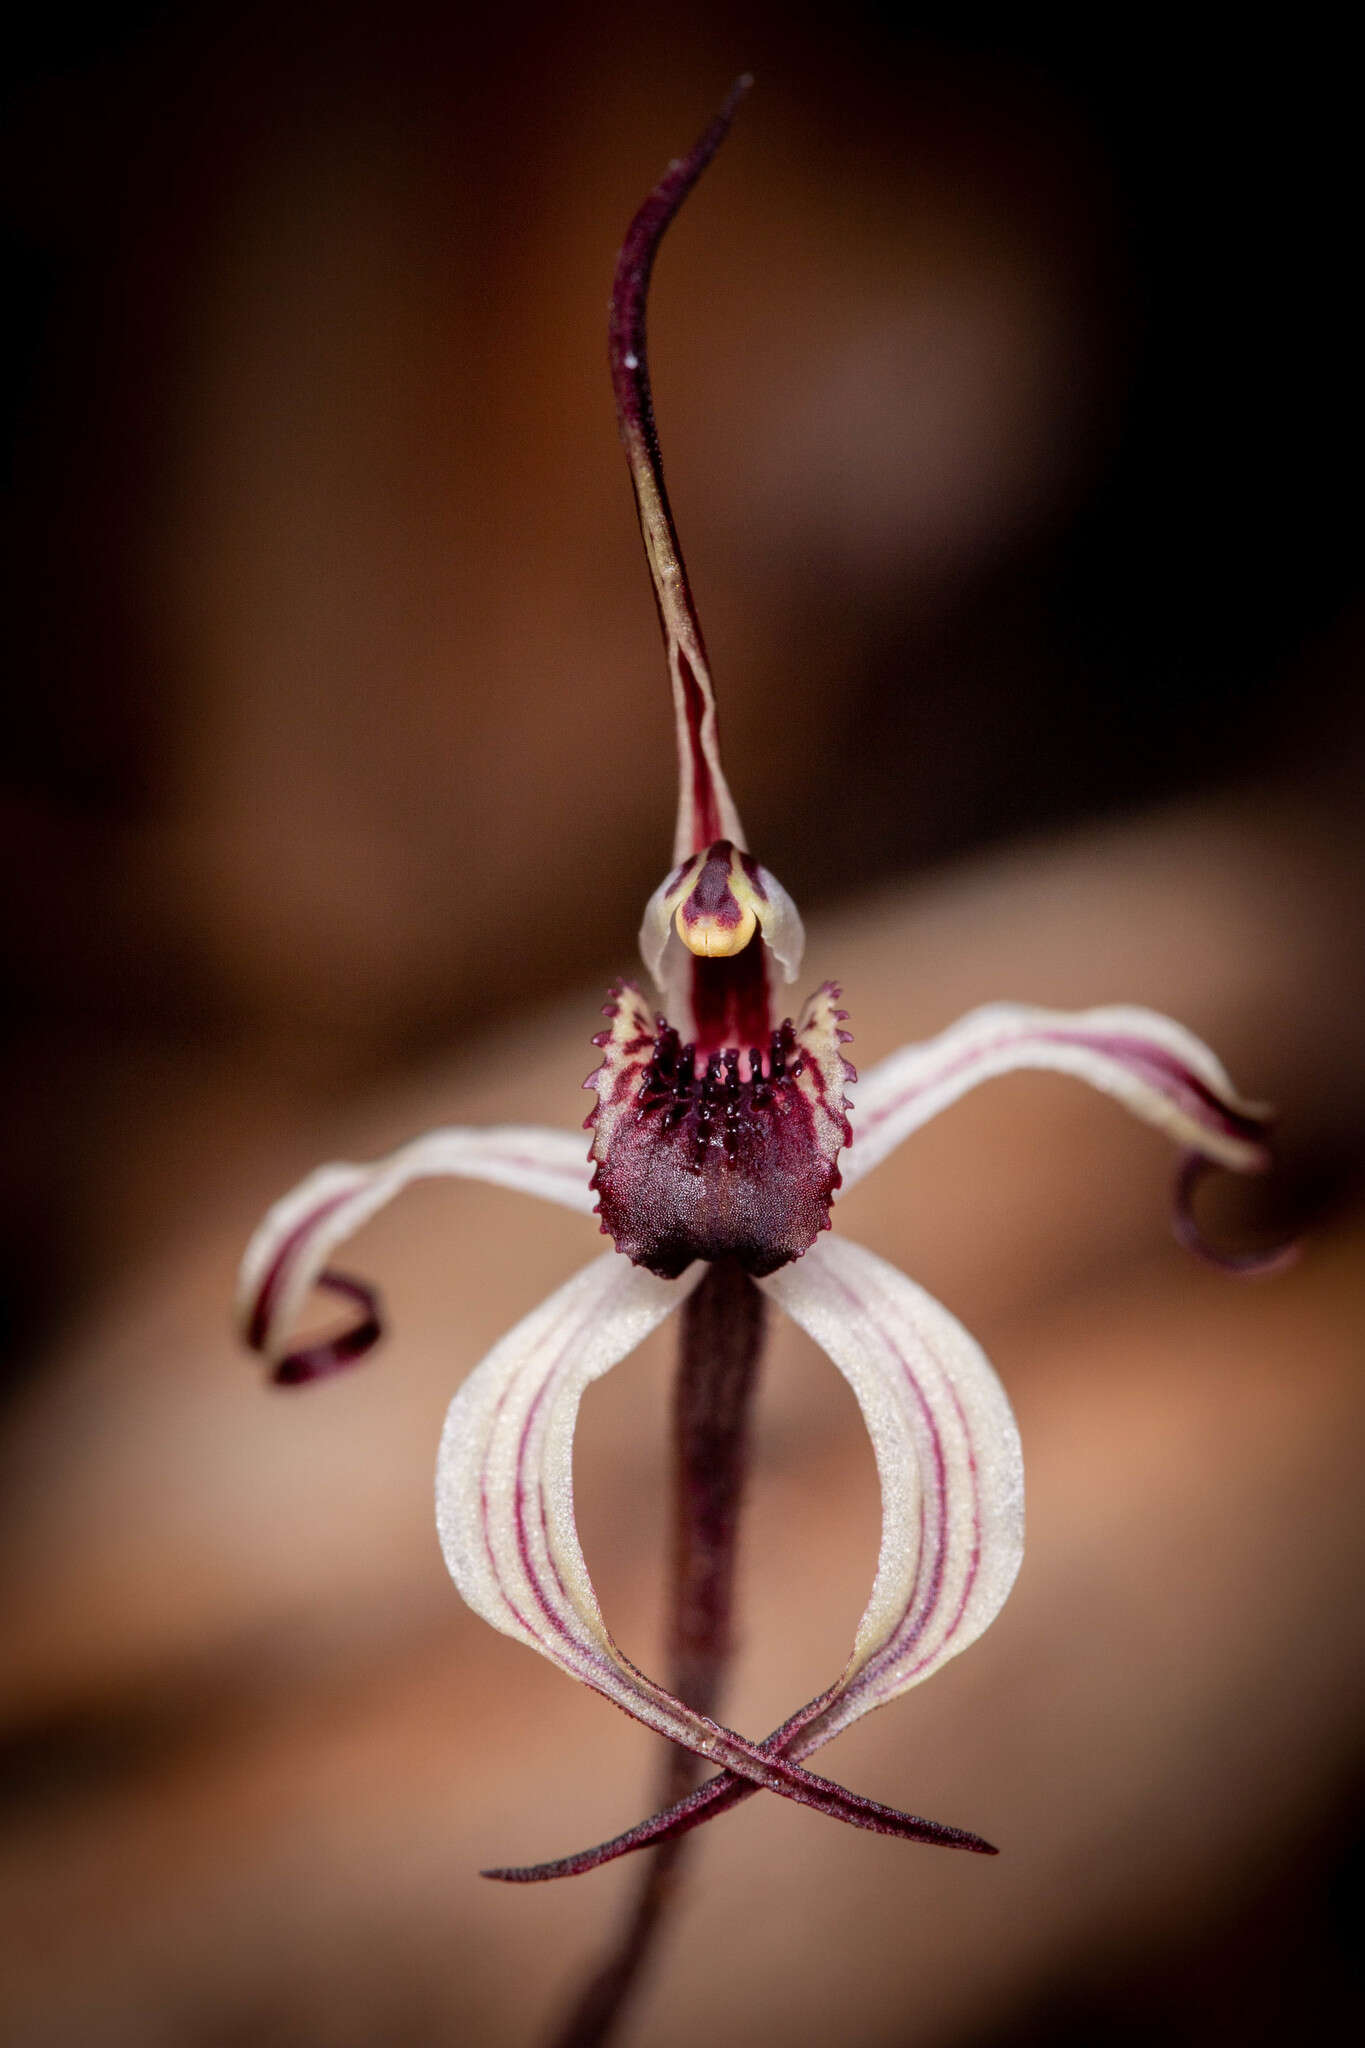 Image of Winter spider orchid